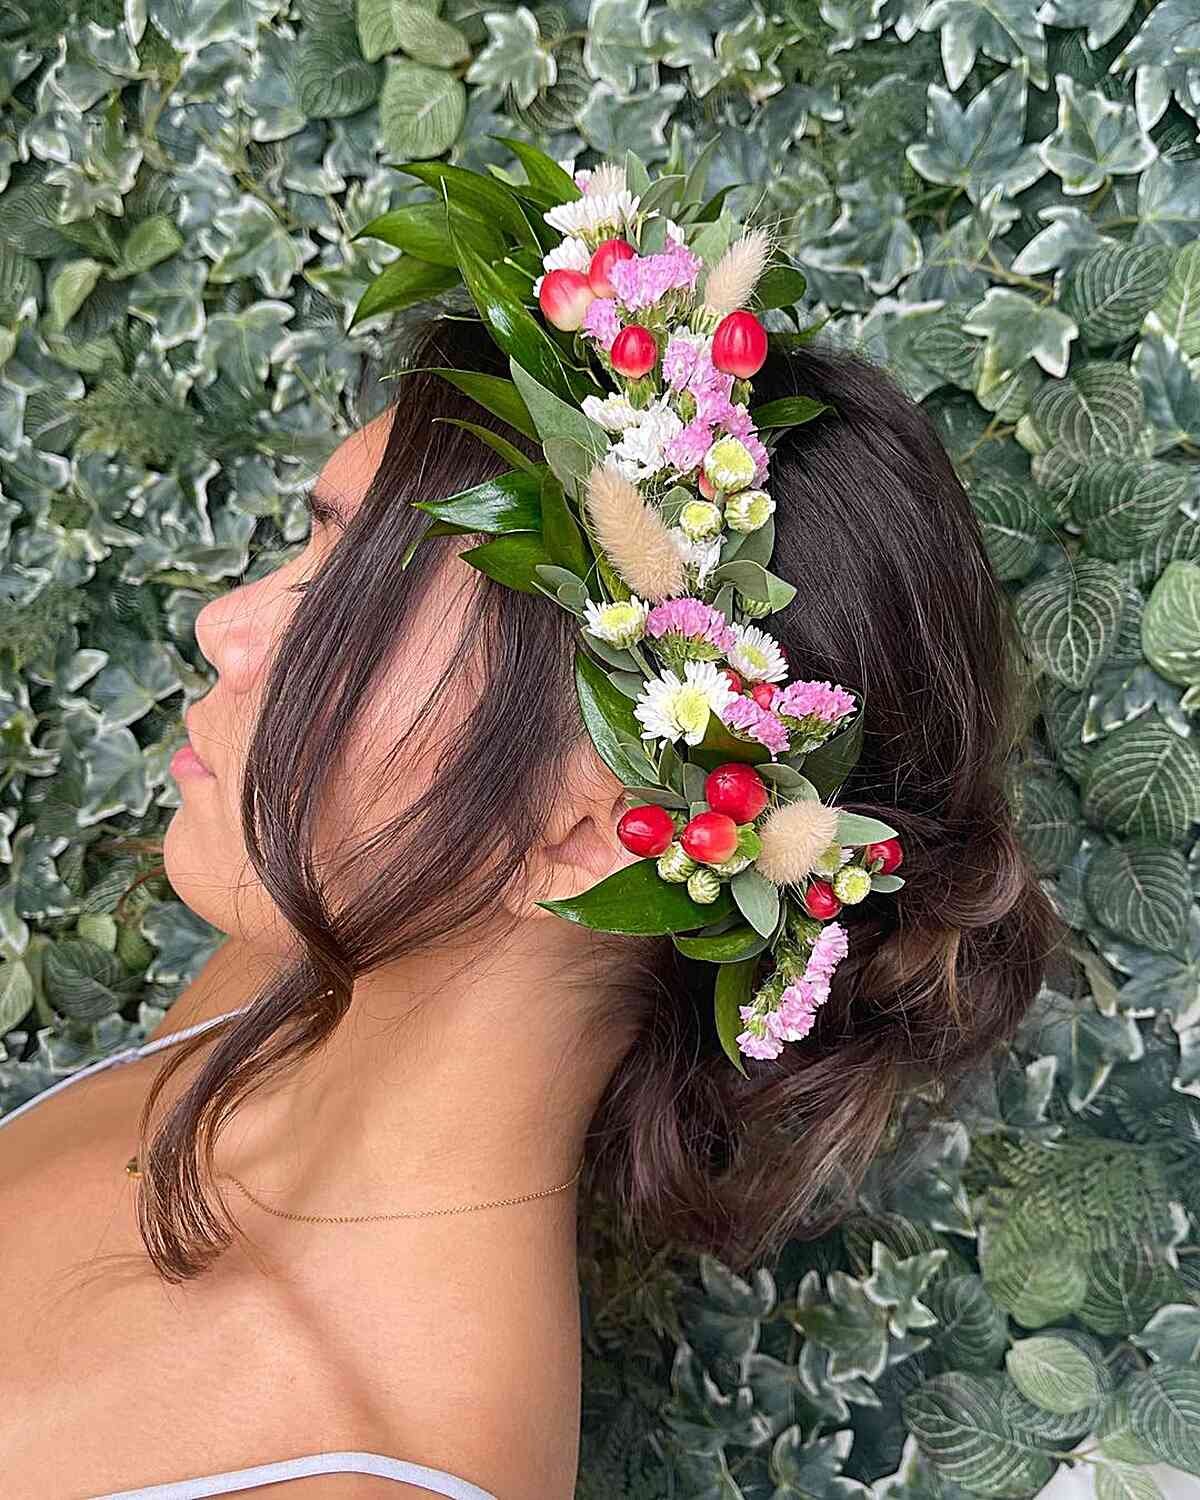 Boho Chic Updo with Flower Crown for festivals